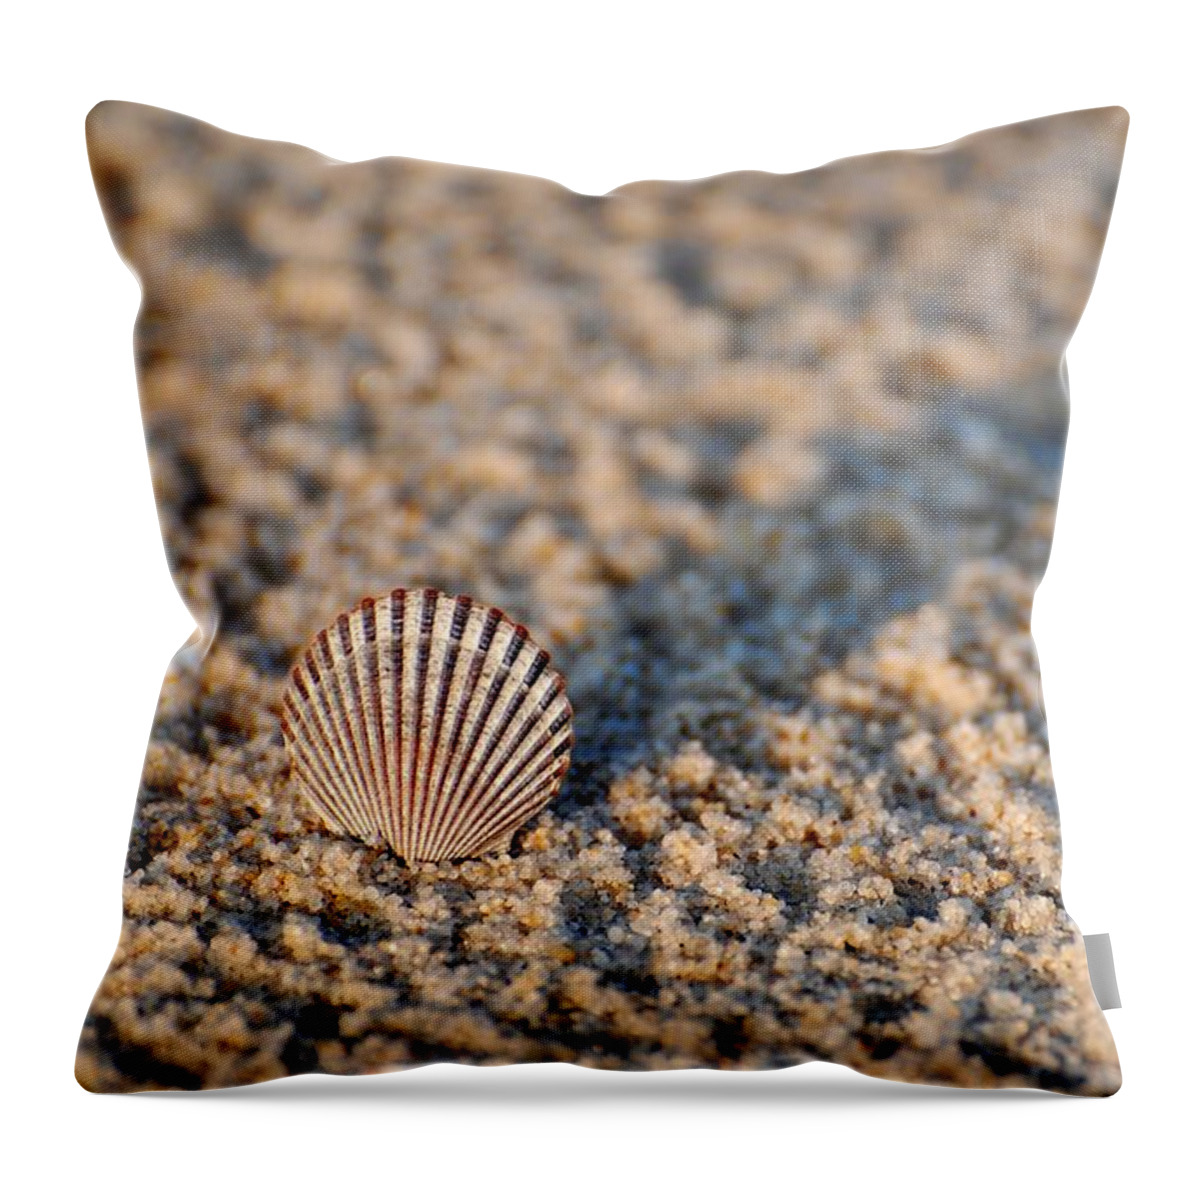 Seashell Throw Pillow featuring the photograph Little Seashell - Jersey Shore by Angie Tirado